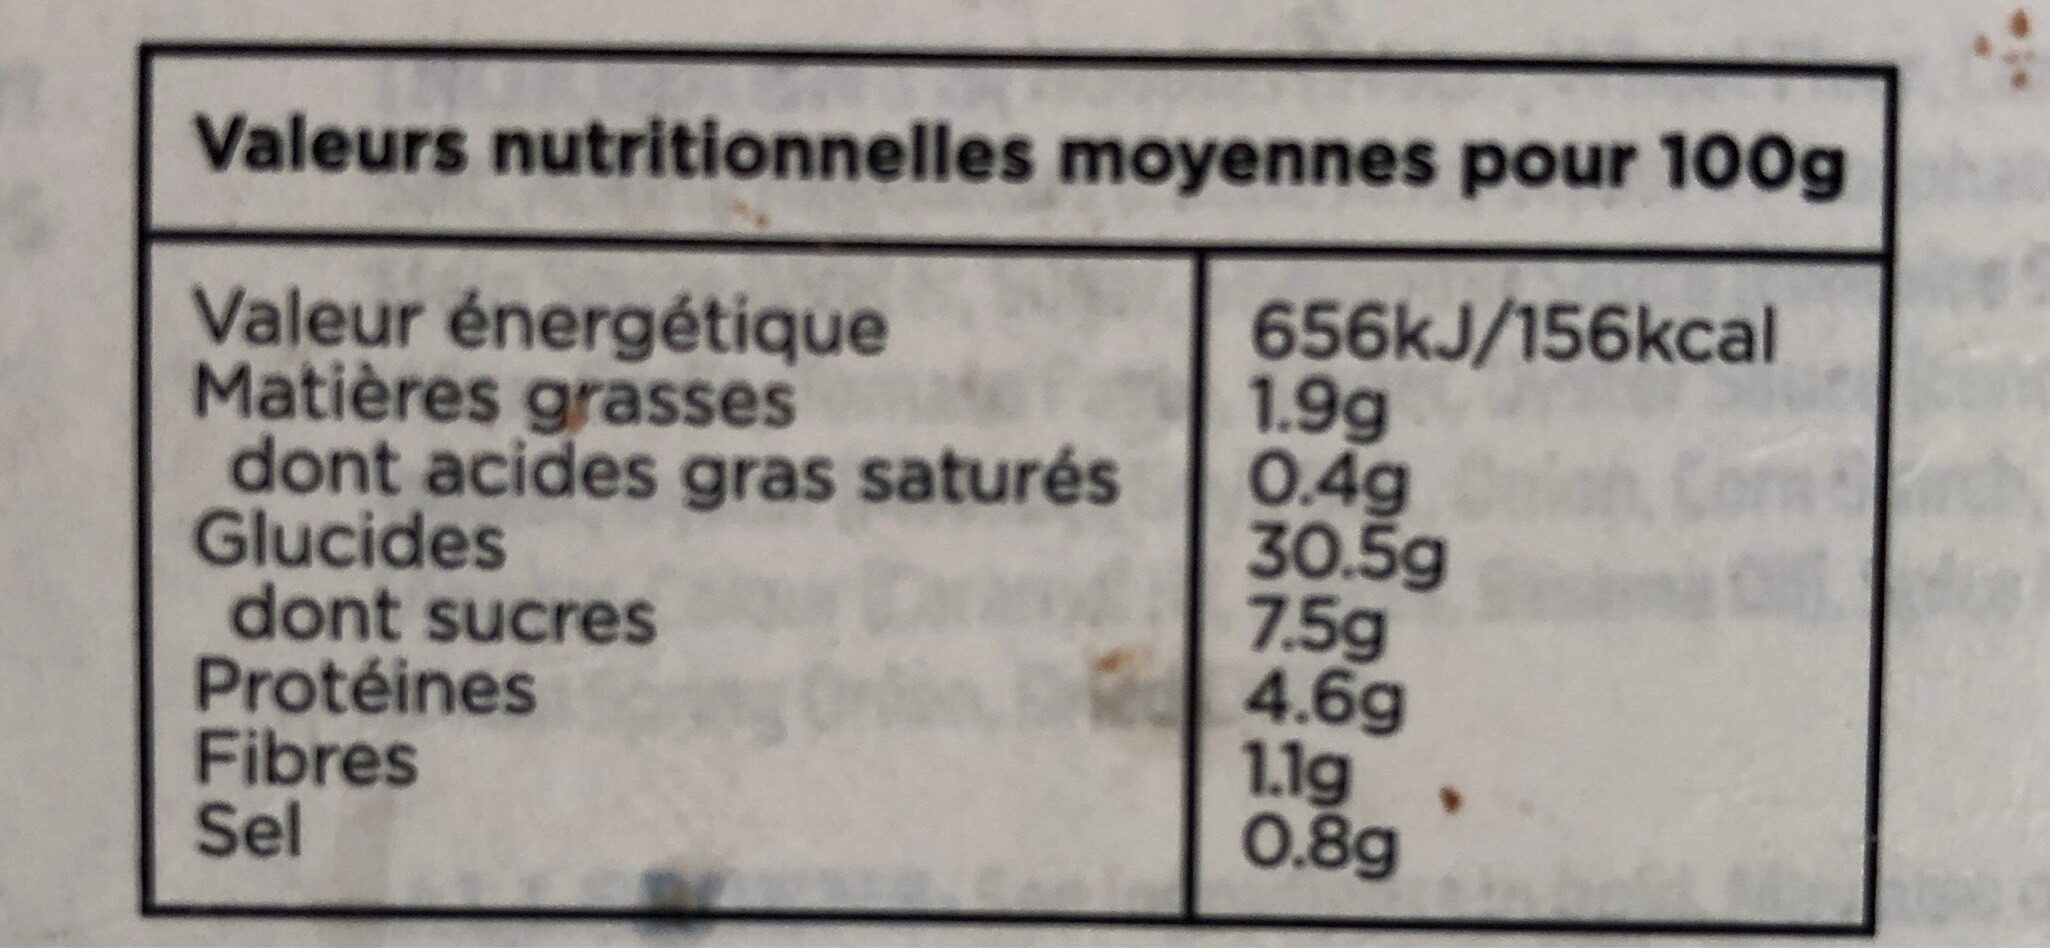 Chow mein - Nutrition facts